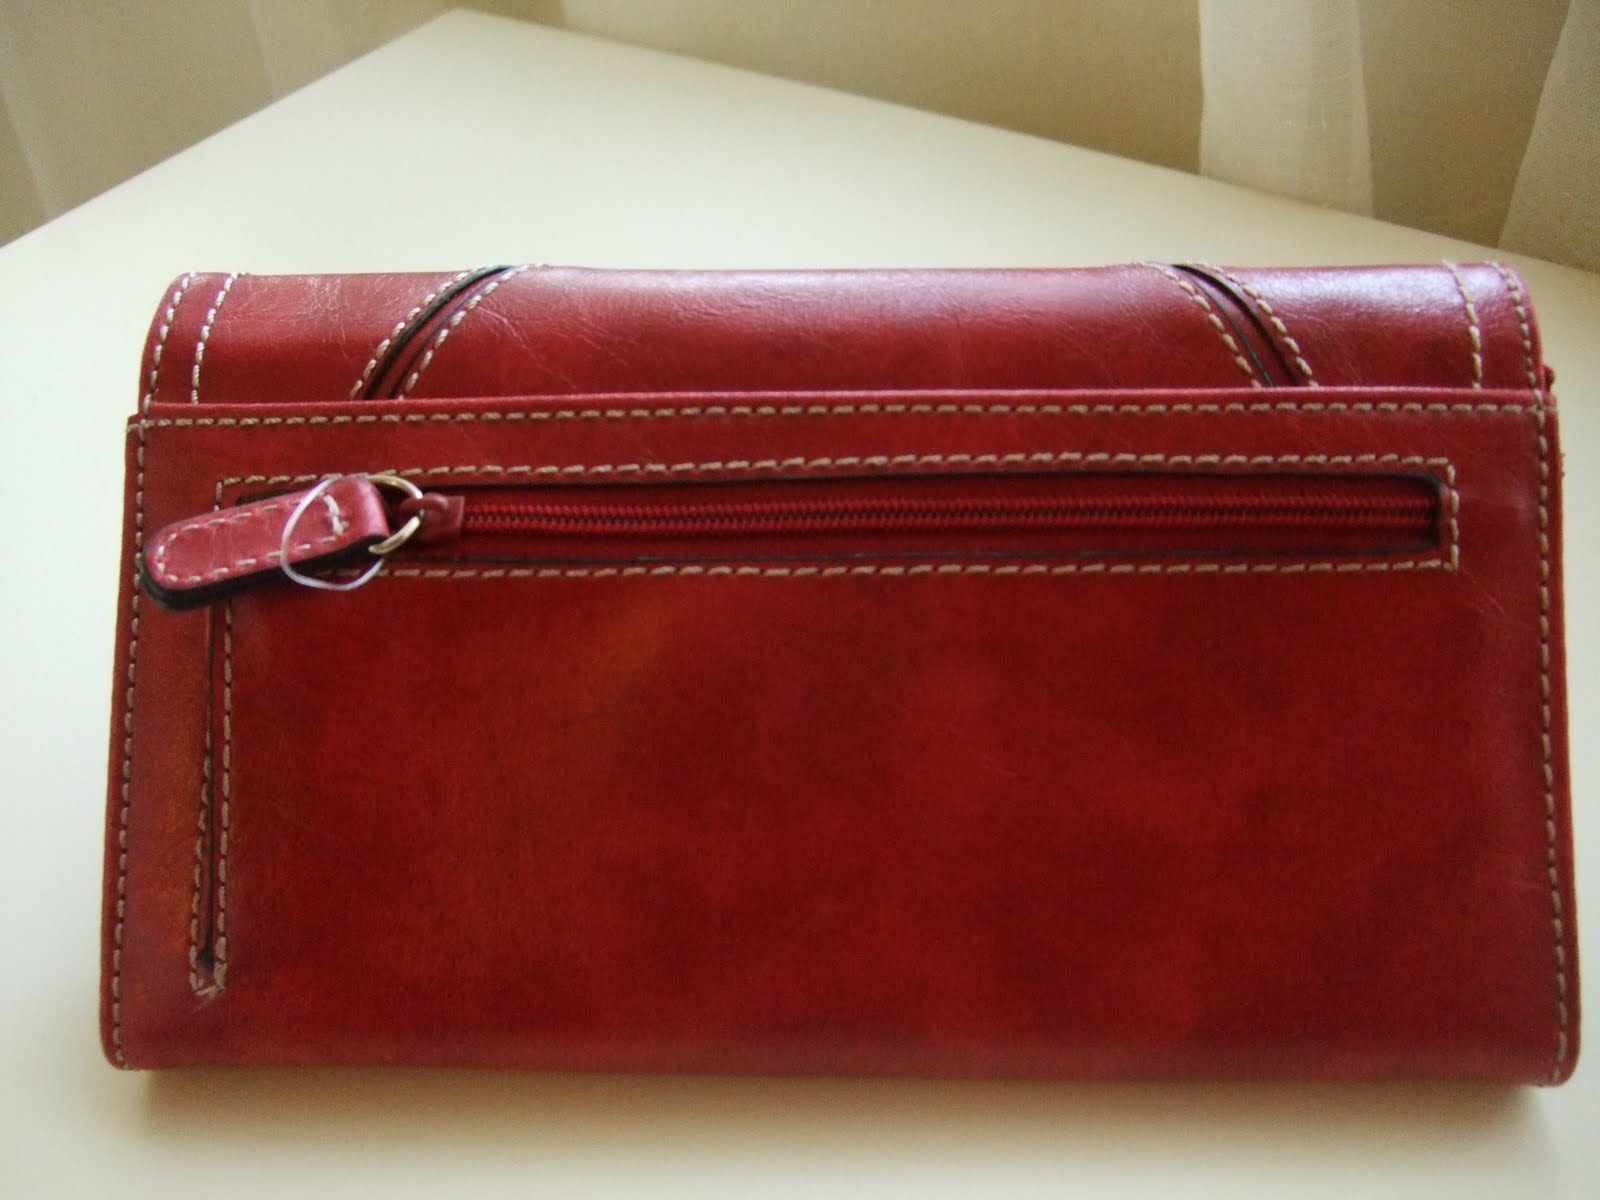 Complete Your Look: Nine West Wallet - Red RM160